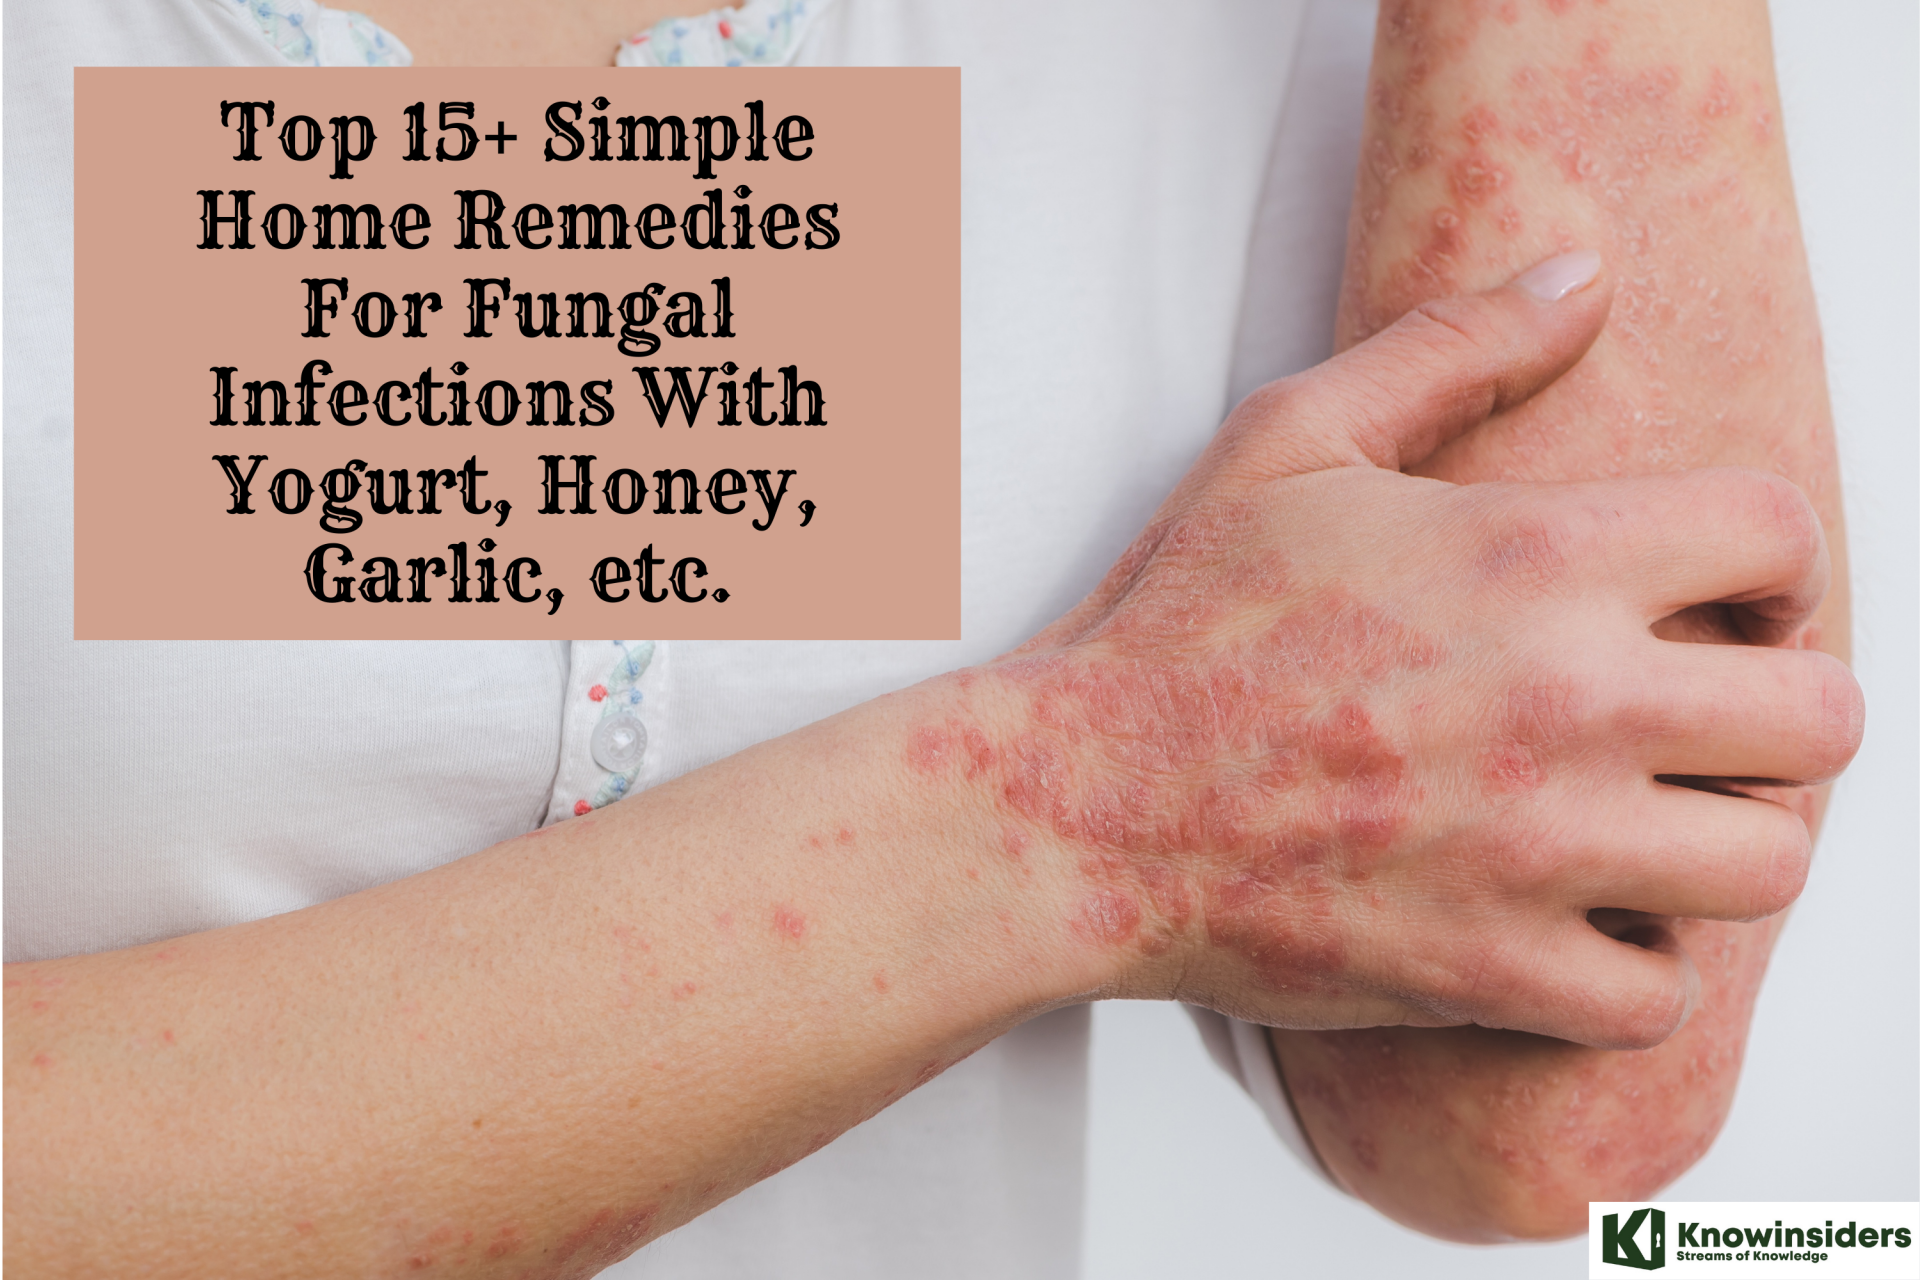 15+ Simple Home Remedies For Fungal Infections With Yogurt, Honey, Garlic, Etc